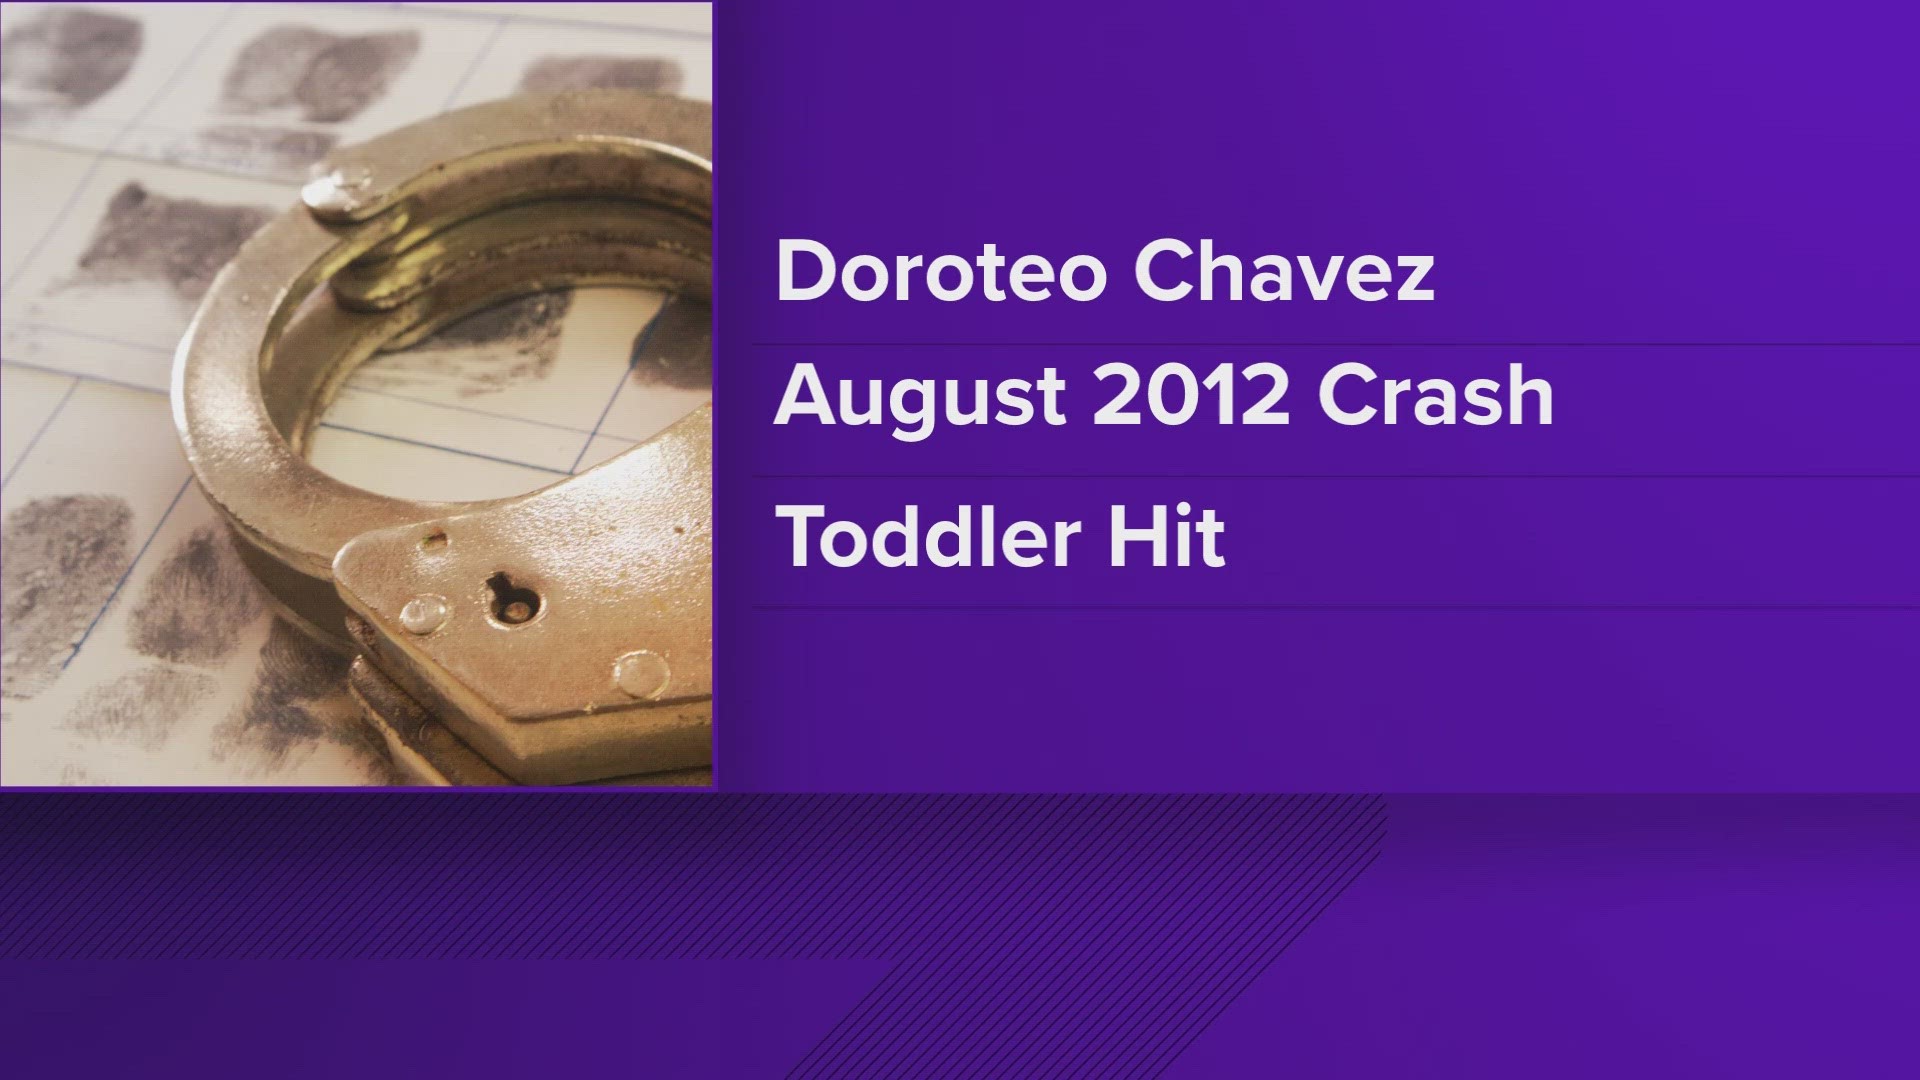 Doroteo Chavez was wanted for drunk driving and hitting a two year old girl in August of 2012.